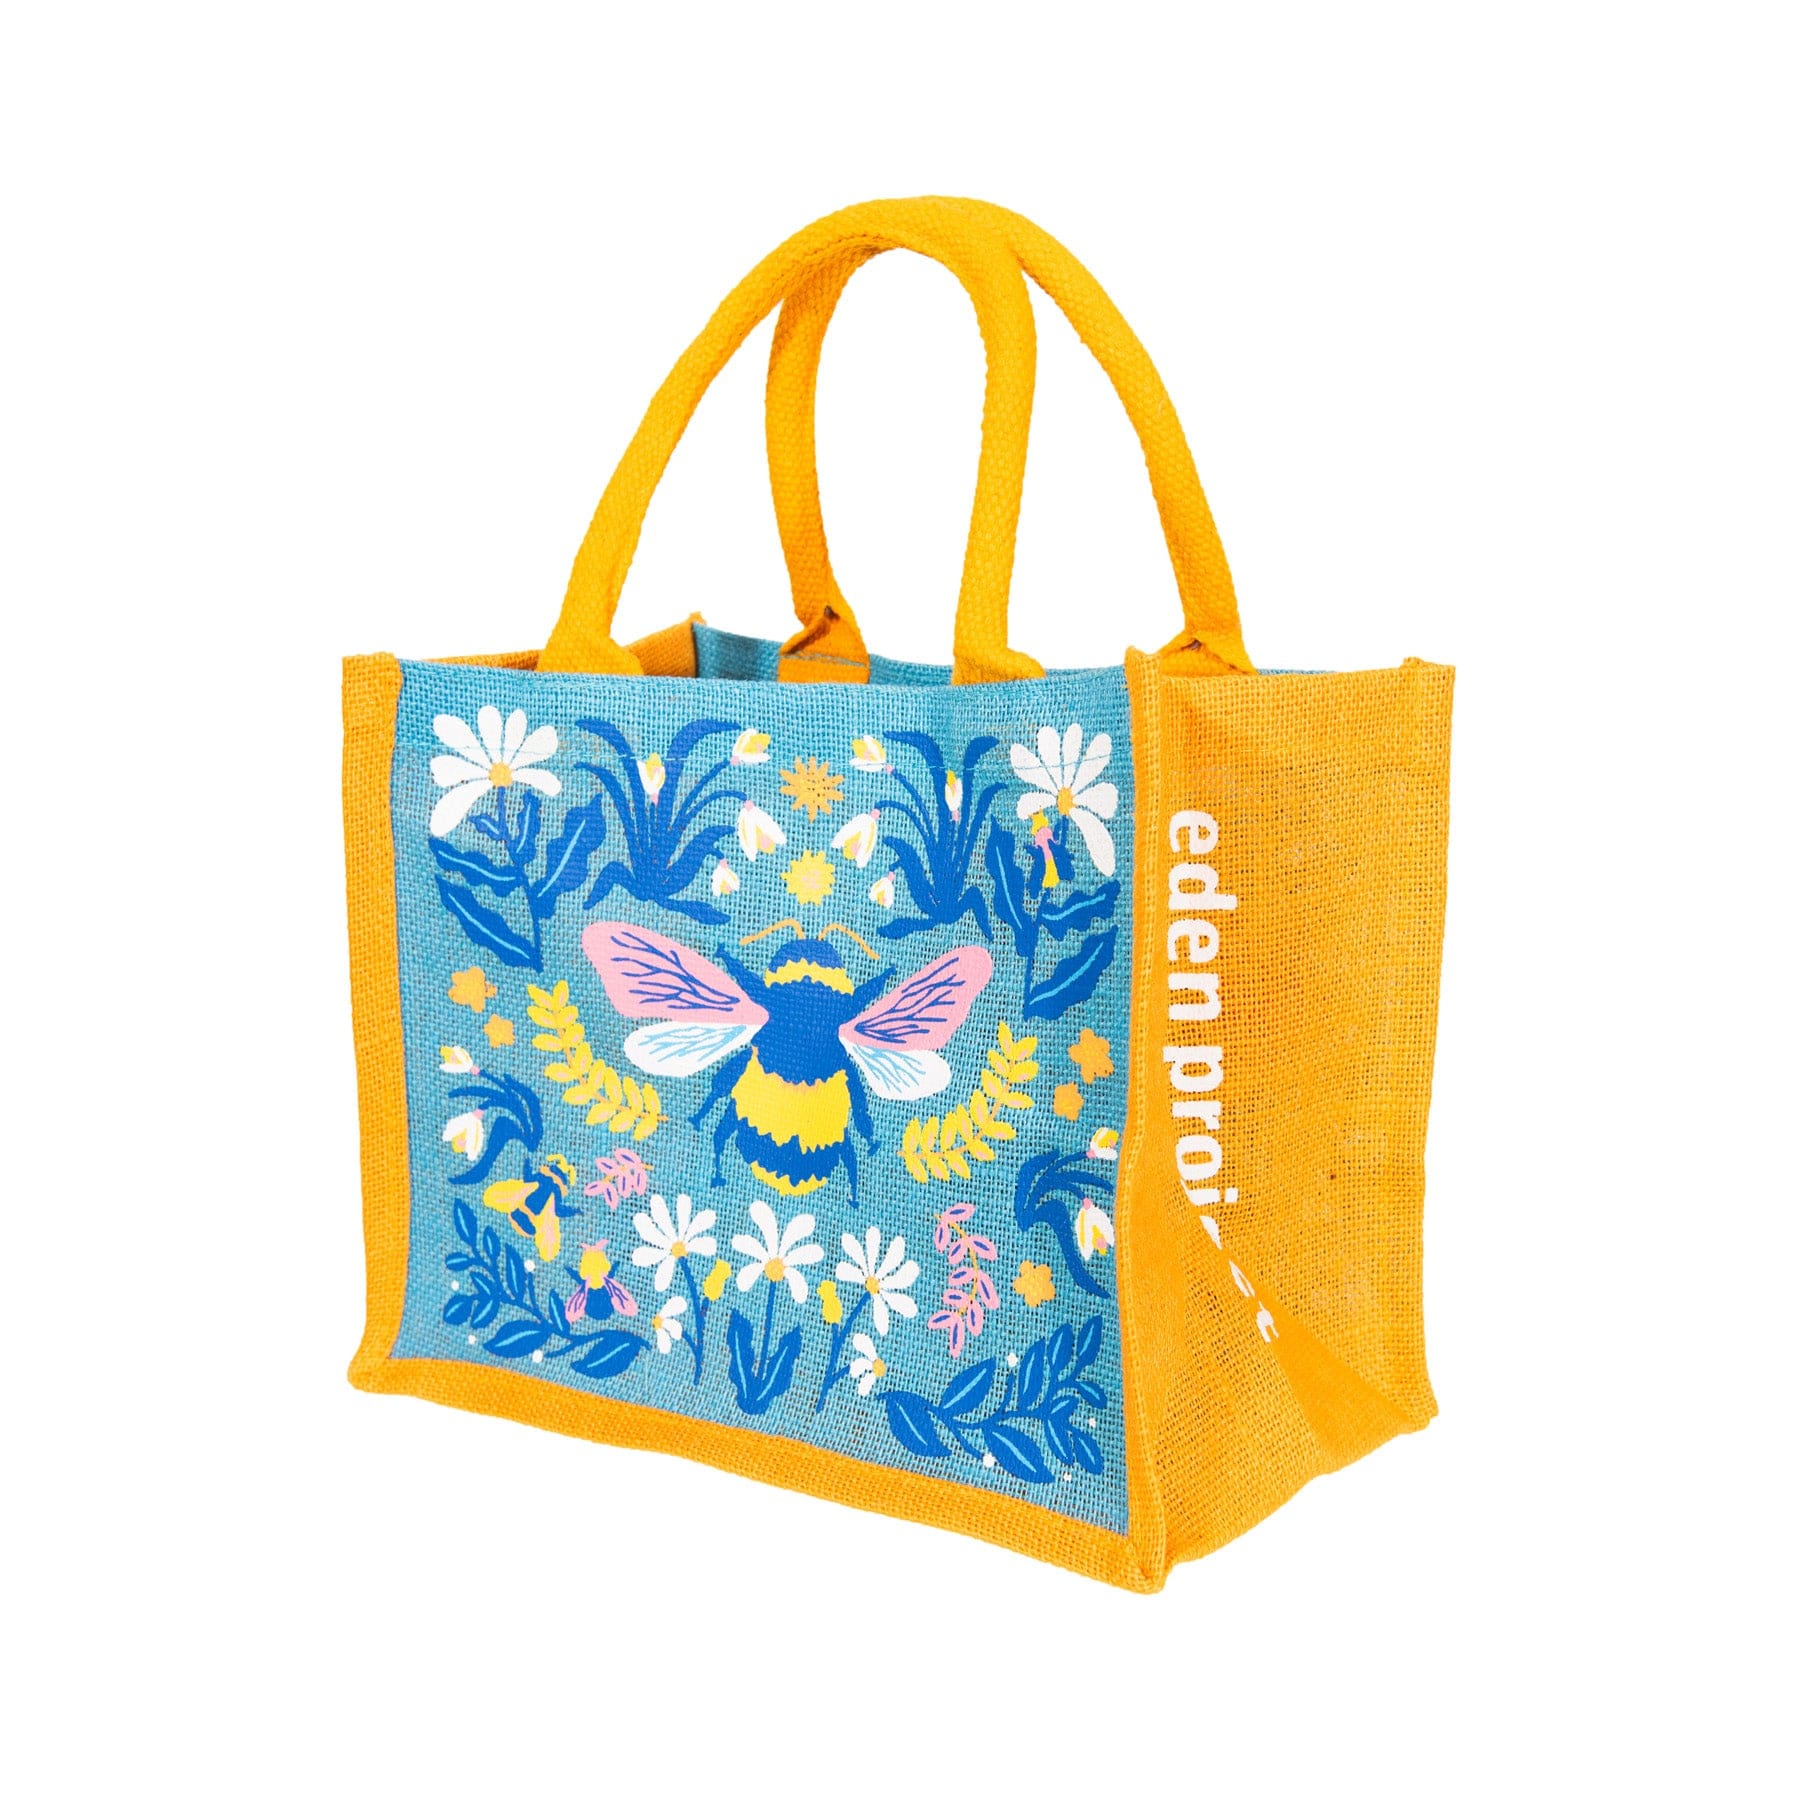 Colorful reusable shopping tote bag with floral and butterfly print on blue background and yellow handles displayed on white background.